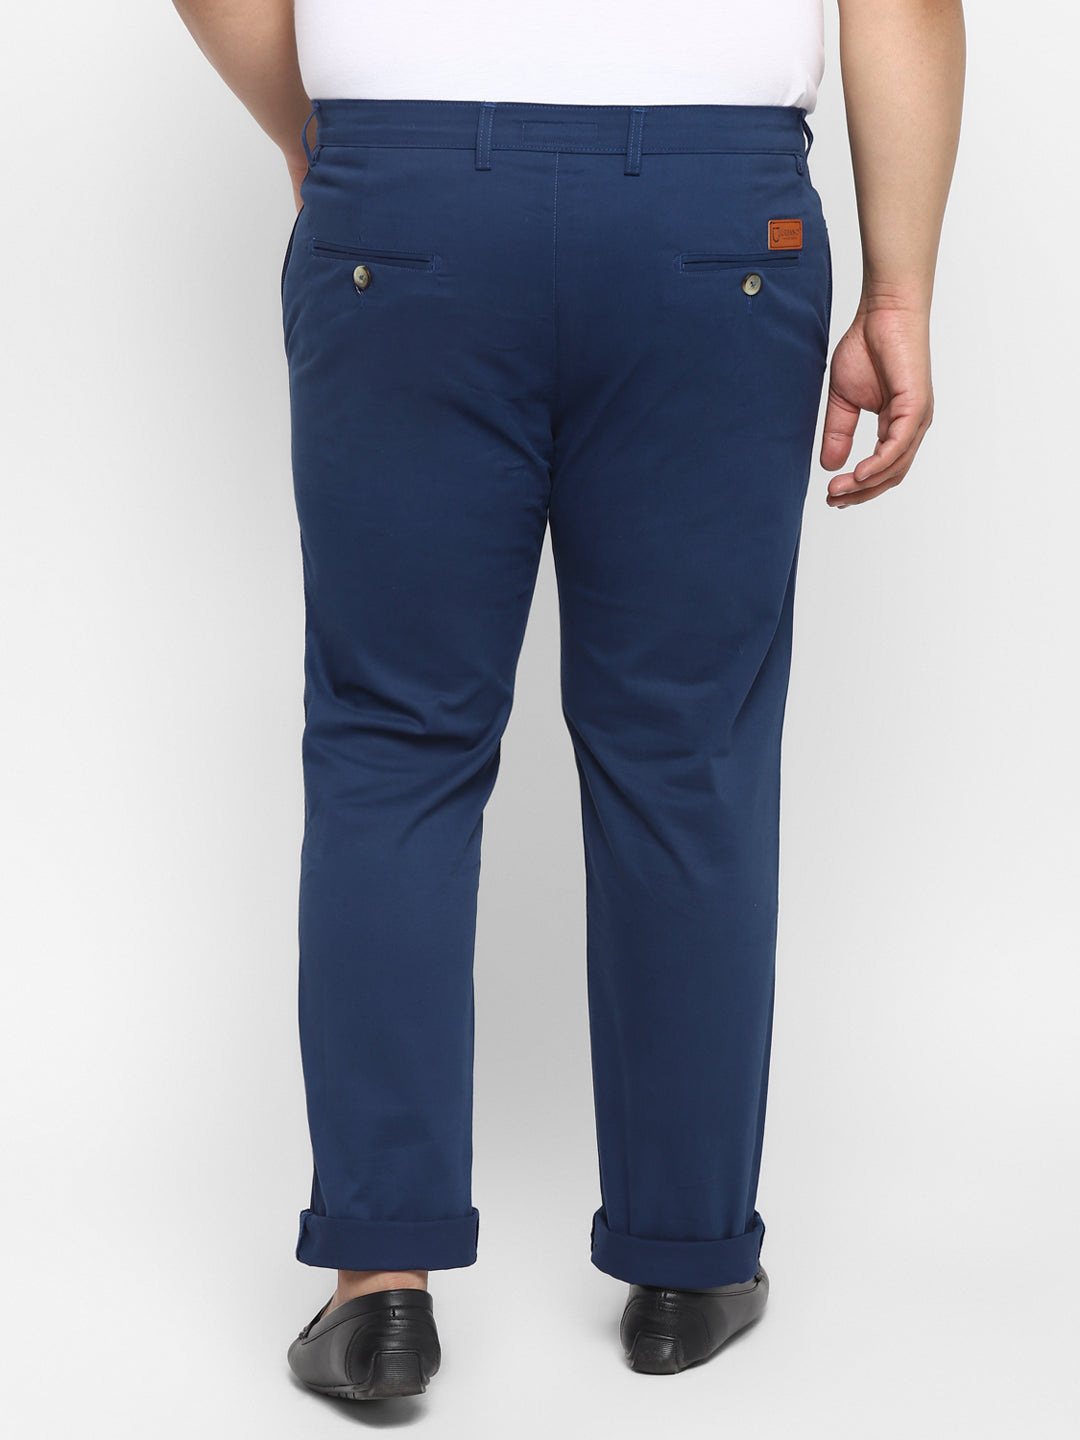 Urbano Plus Men's Royal Blue Cotton Regular Fit Casual Chinos Trousers Stretch